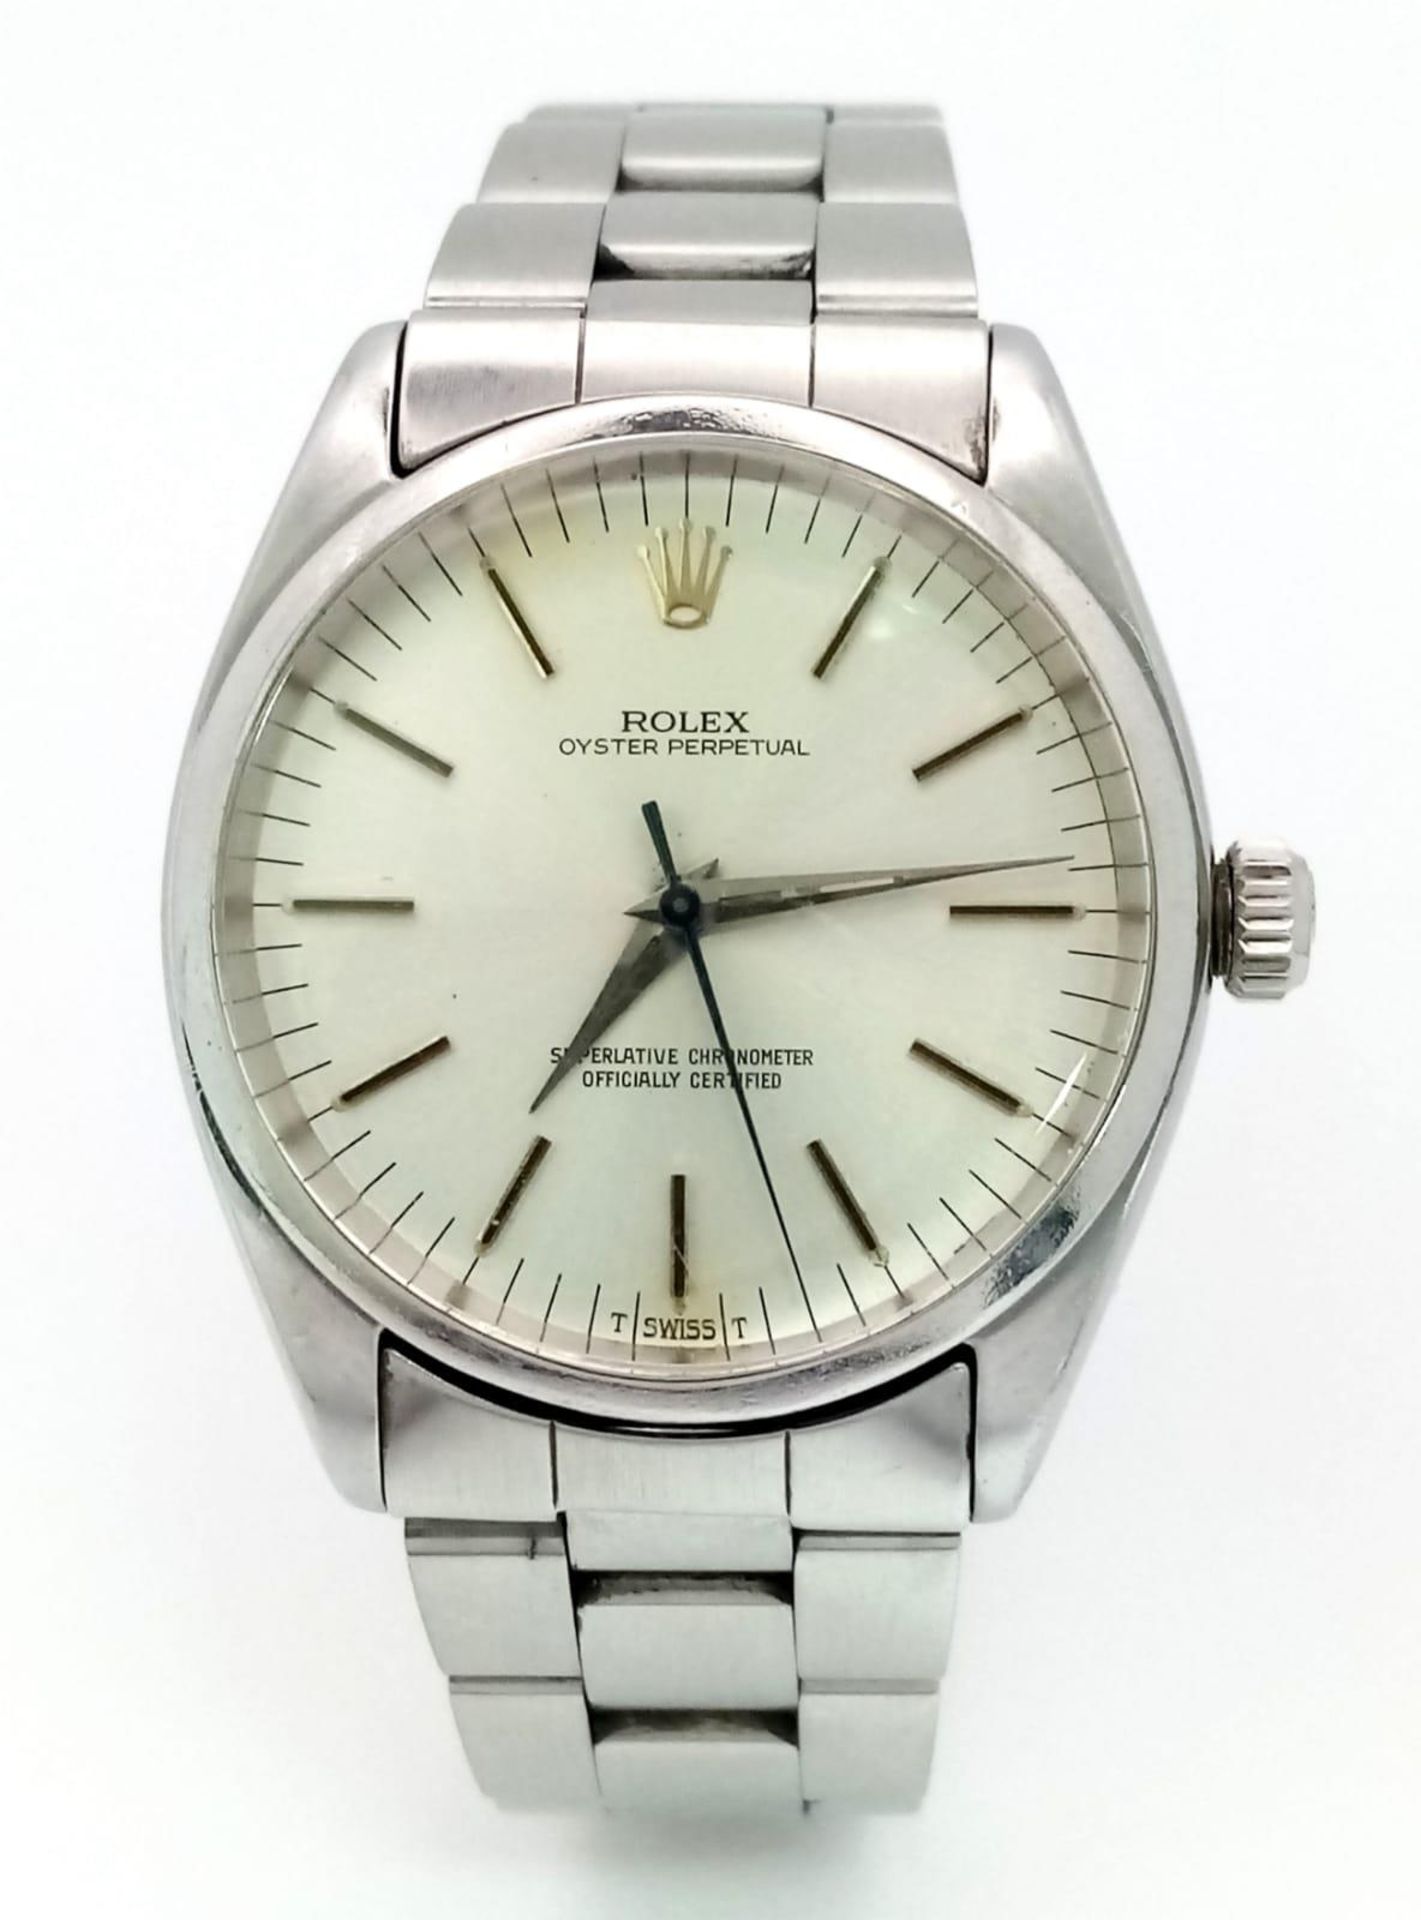 A Rolex Oyster Perpetual Automatic Gents Watch. Stainless steel strap and case - 35mm. Silver tone - Image 10 of 27